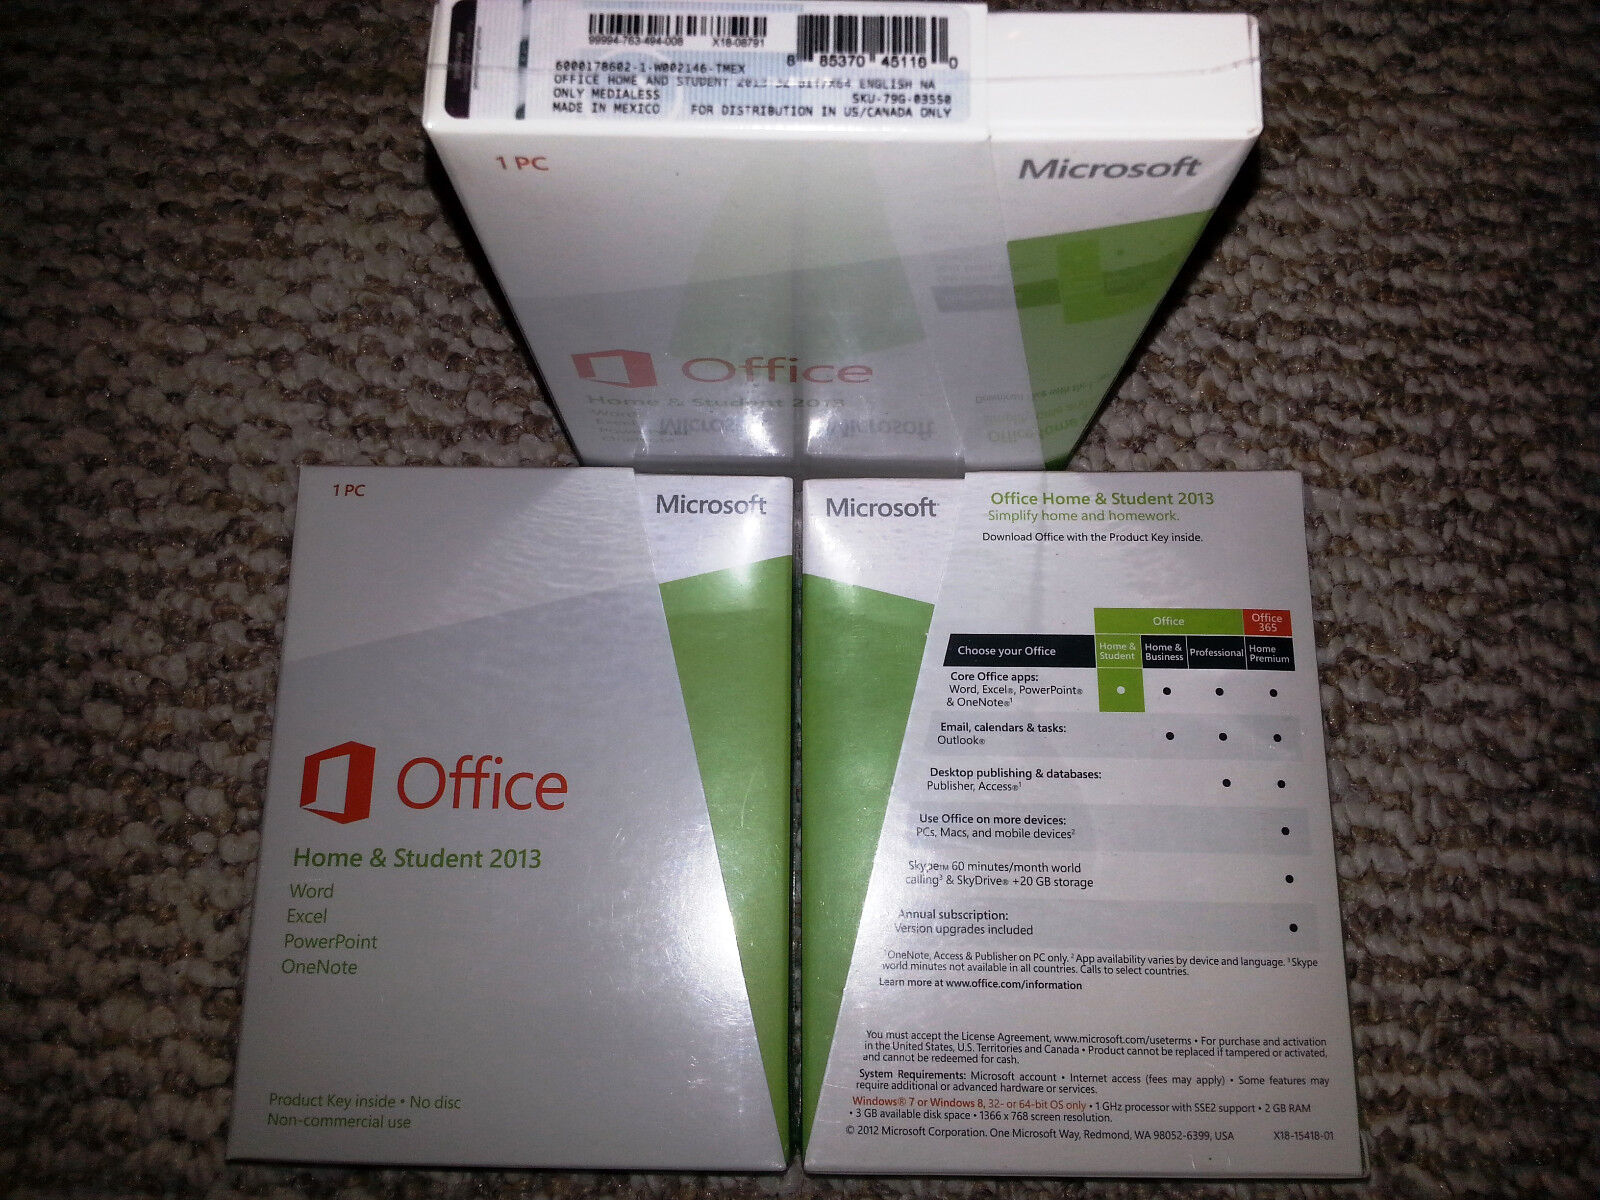 Microsoft Office Home and Student 2013,Sealed Retail Box,SKU 79G-03550,Key Card